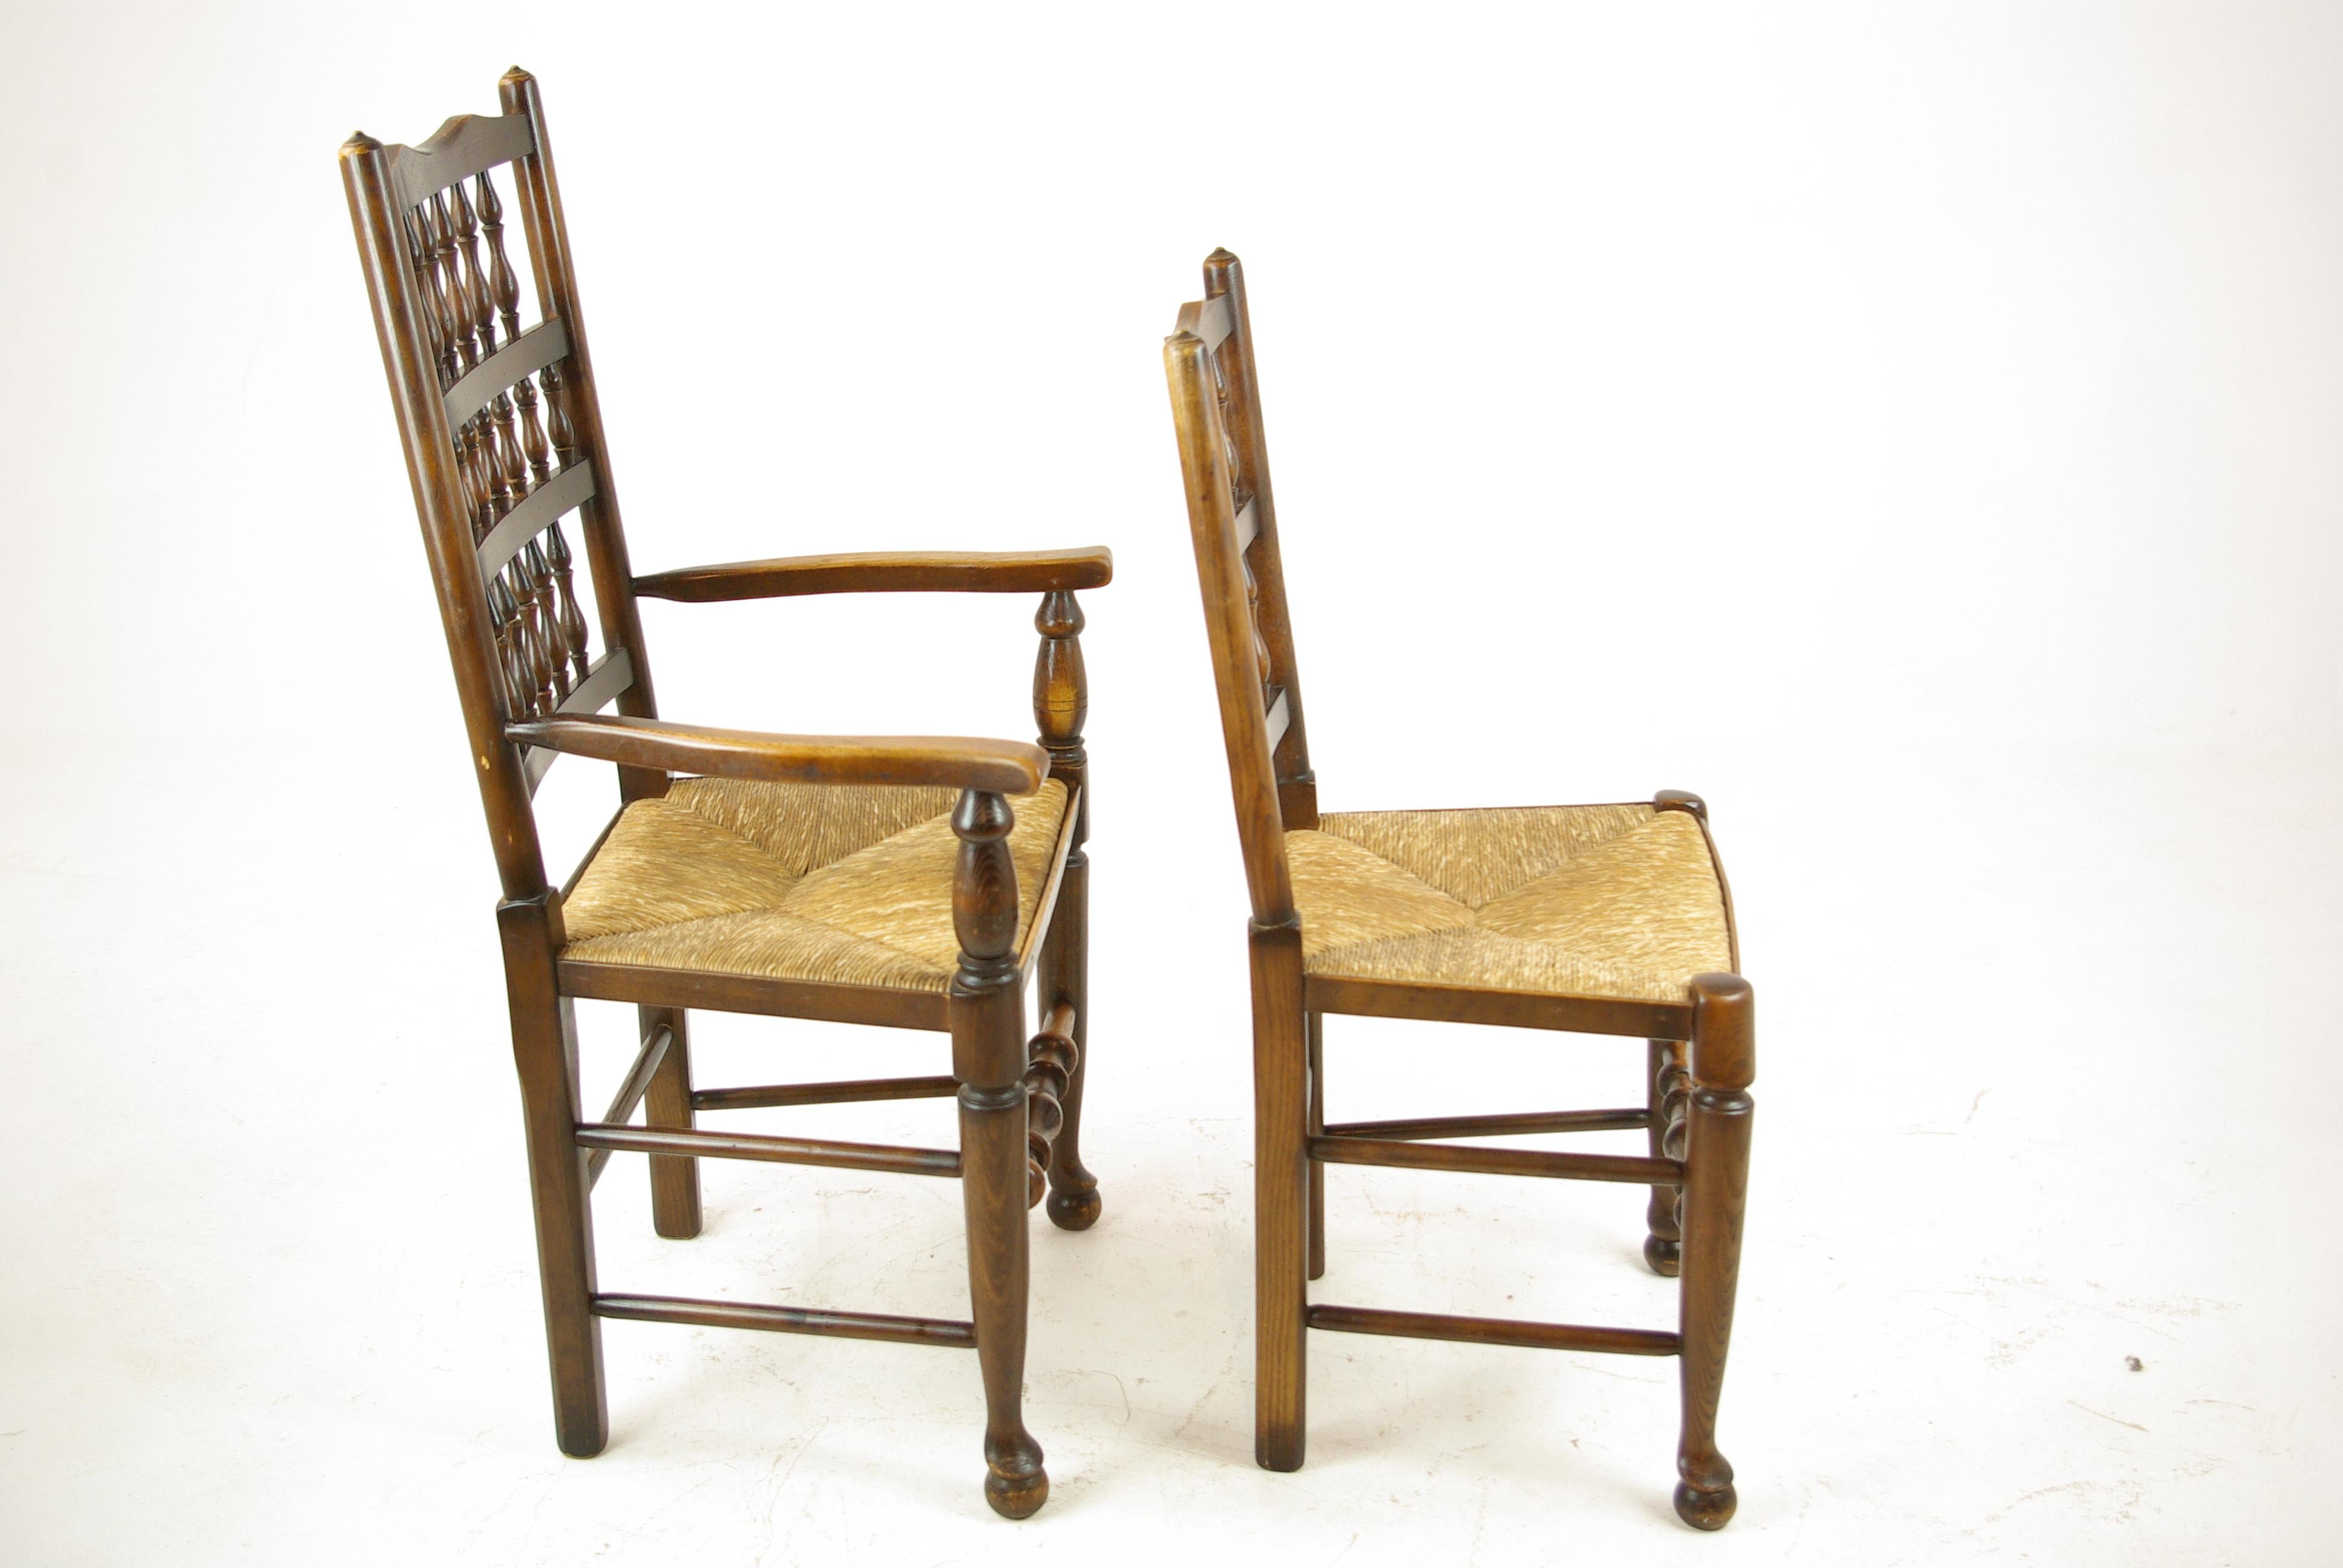 Antique dining chairs, country rush chairs, 6+2 chairs, Scotland, 1900, Antique Furniture, B1252

Scotland, 1900
Solid elm construction with rush woven seats
Original finish
Shaped top rails
Open spindle back
Raised on turned forelegs, with